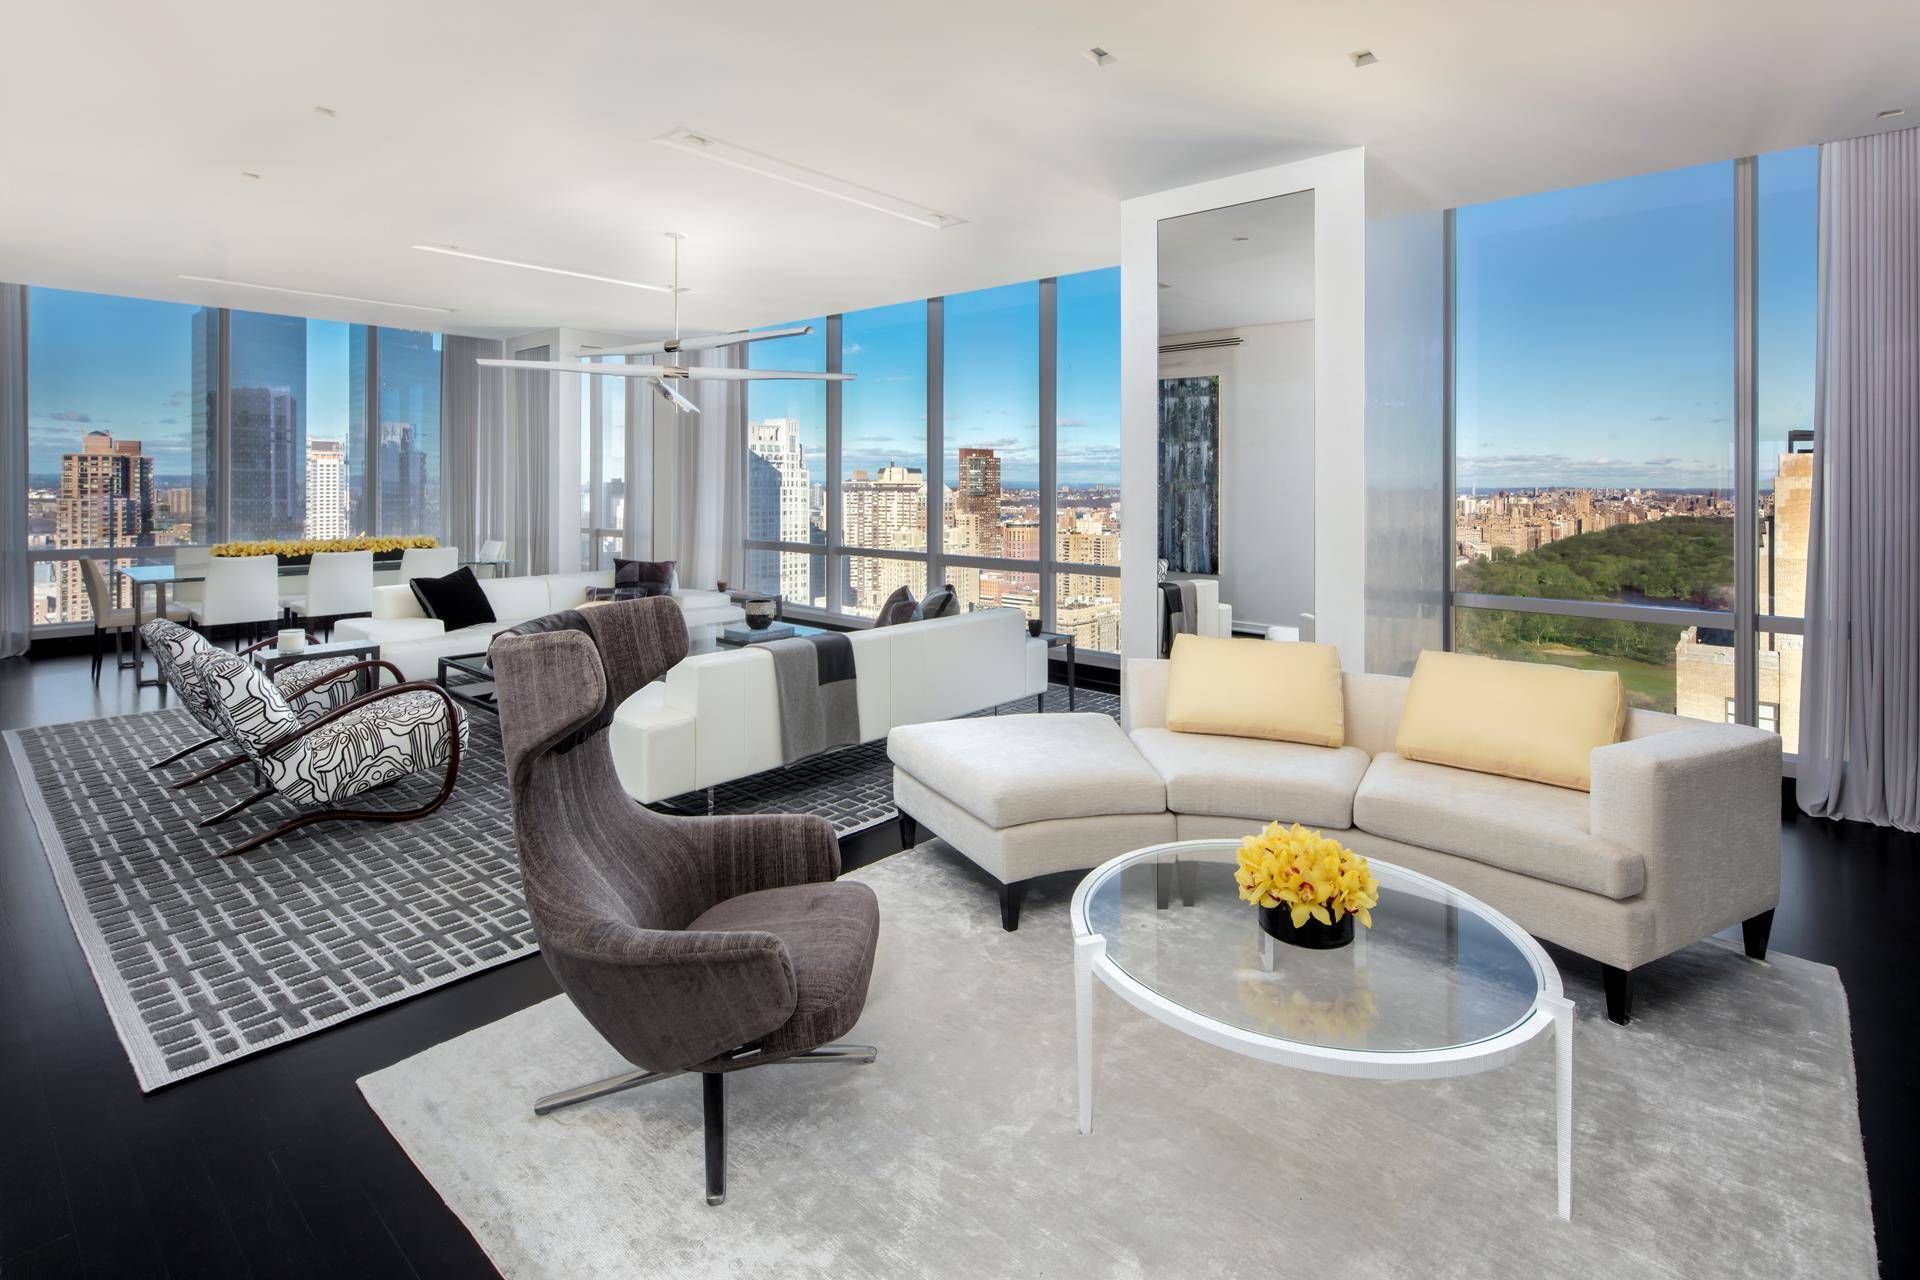 At approximately 3, 200 square feet, 45A is a gracious three bedroom, three and a half bath home that epitomizes glamorous living at One57.